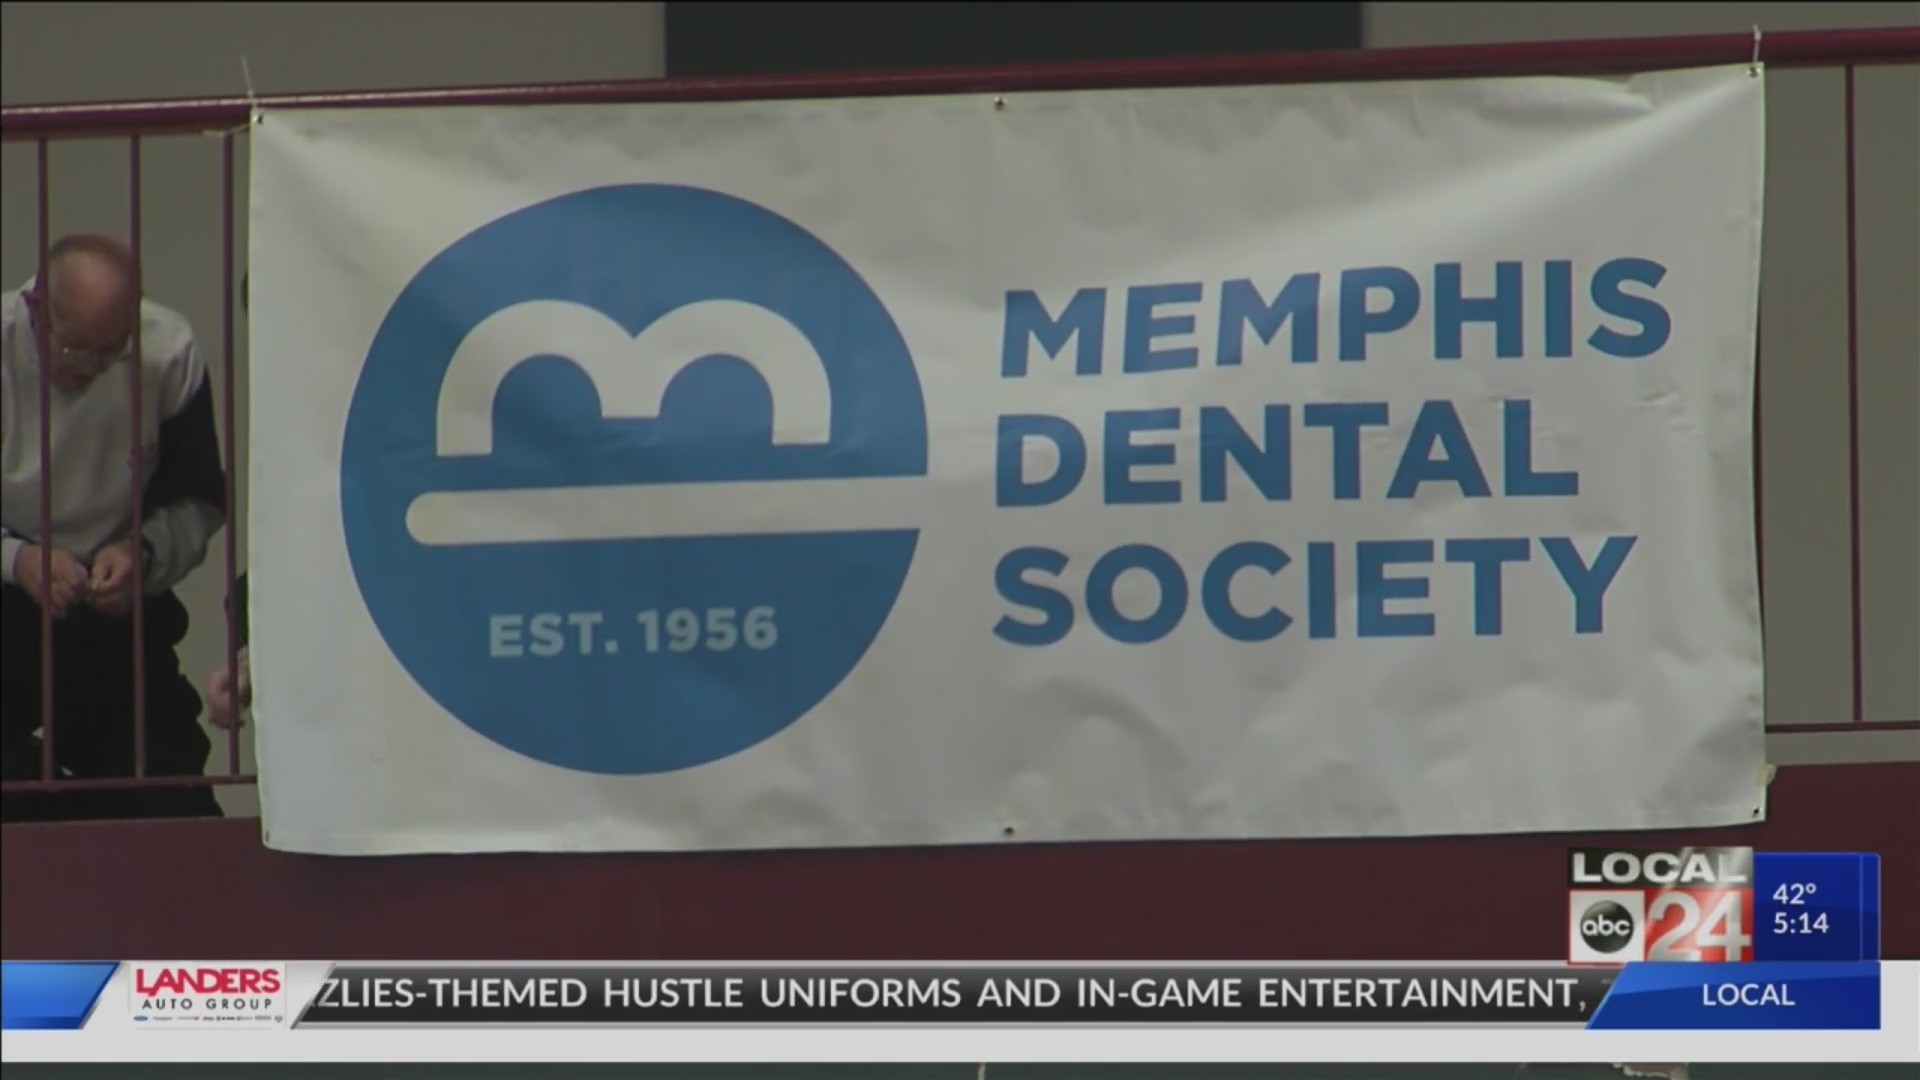 Local dentists on a Mission of Mercy to help those in need